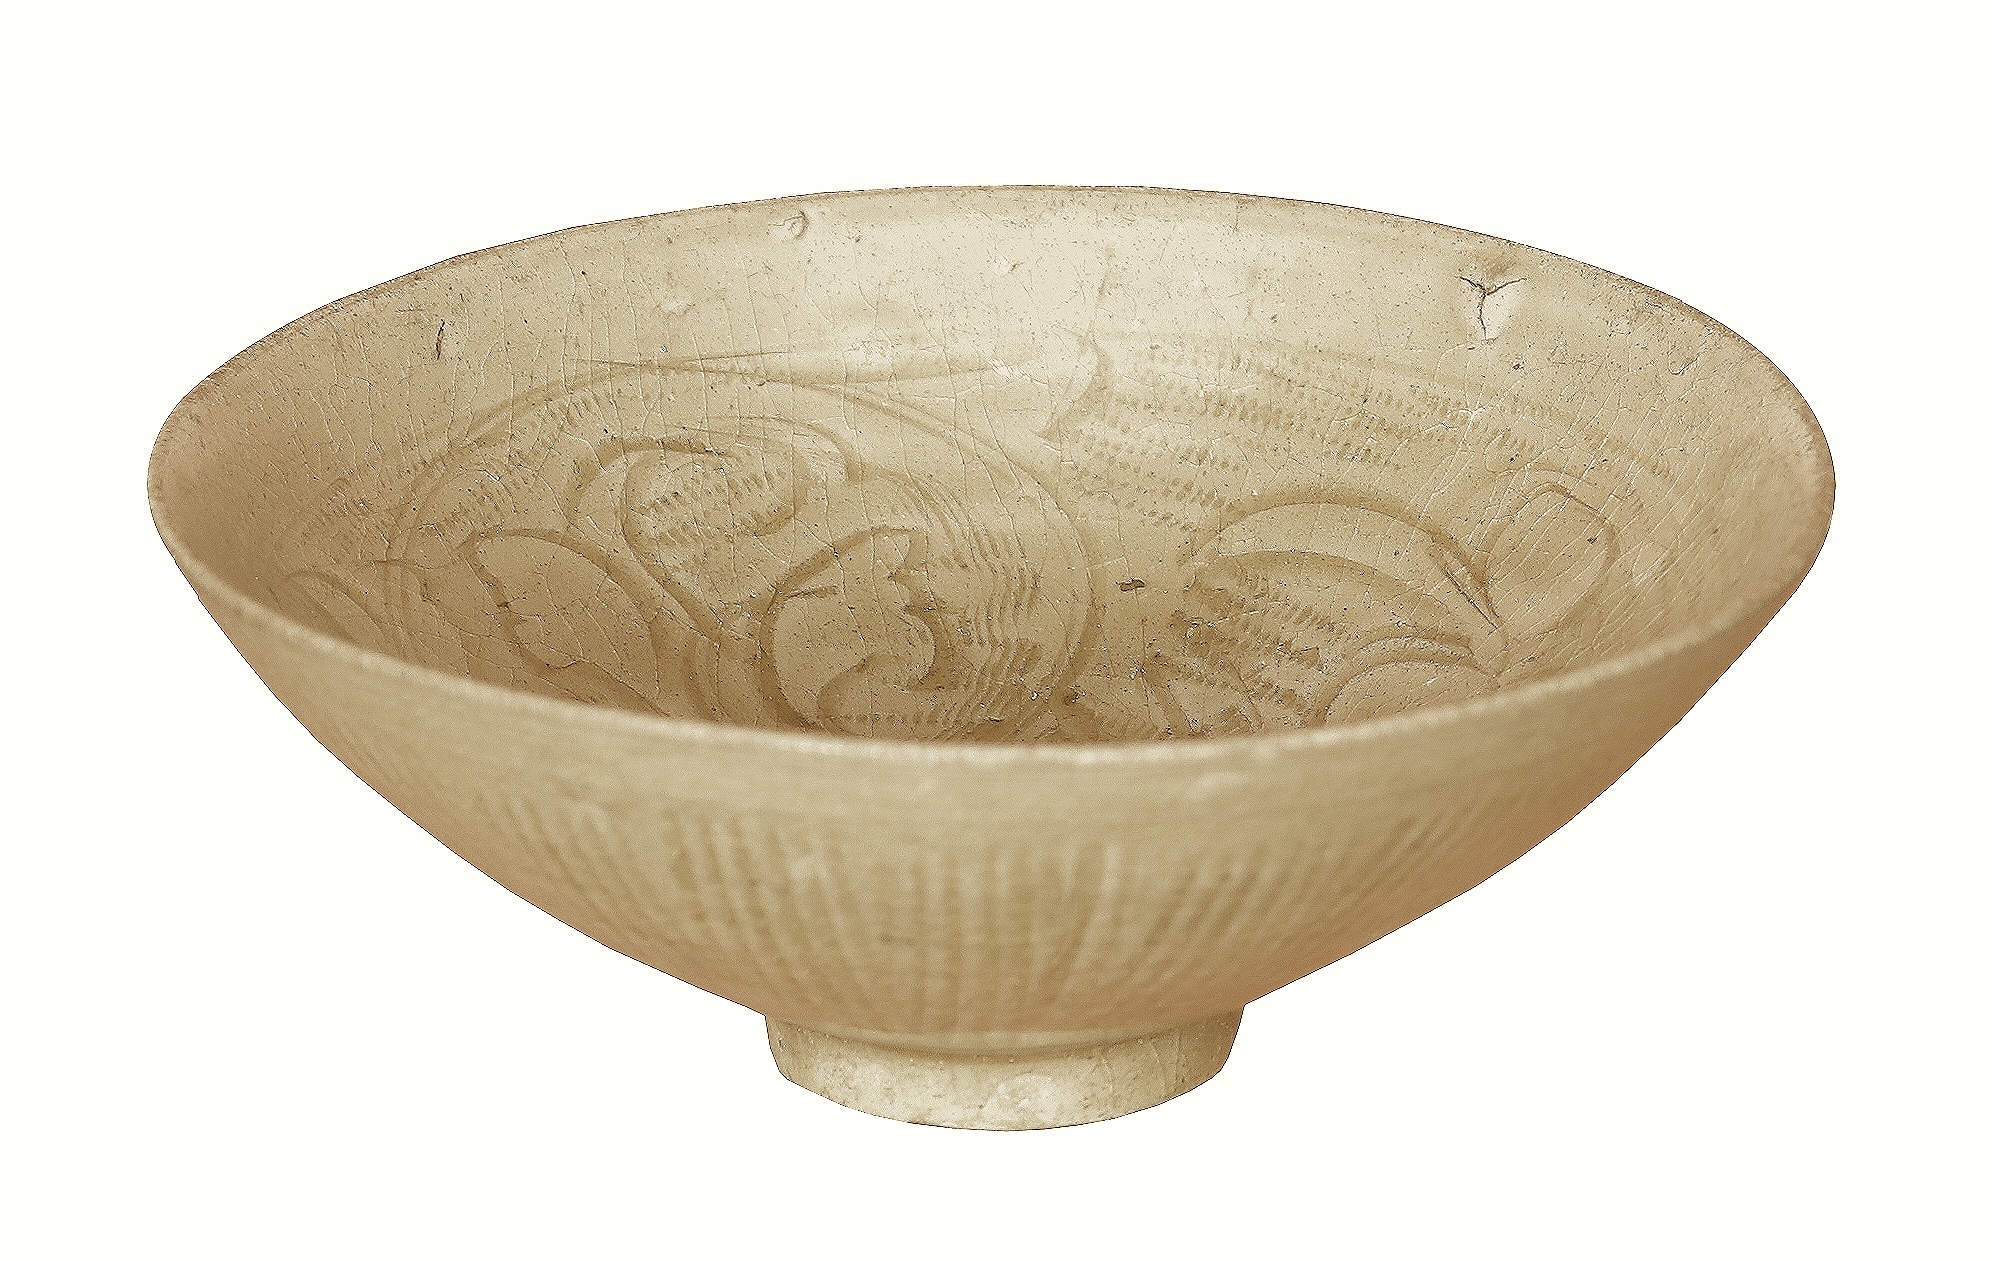 A Song dynasty northern celadon carved bowl